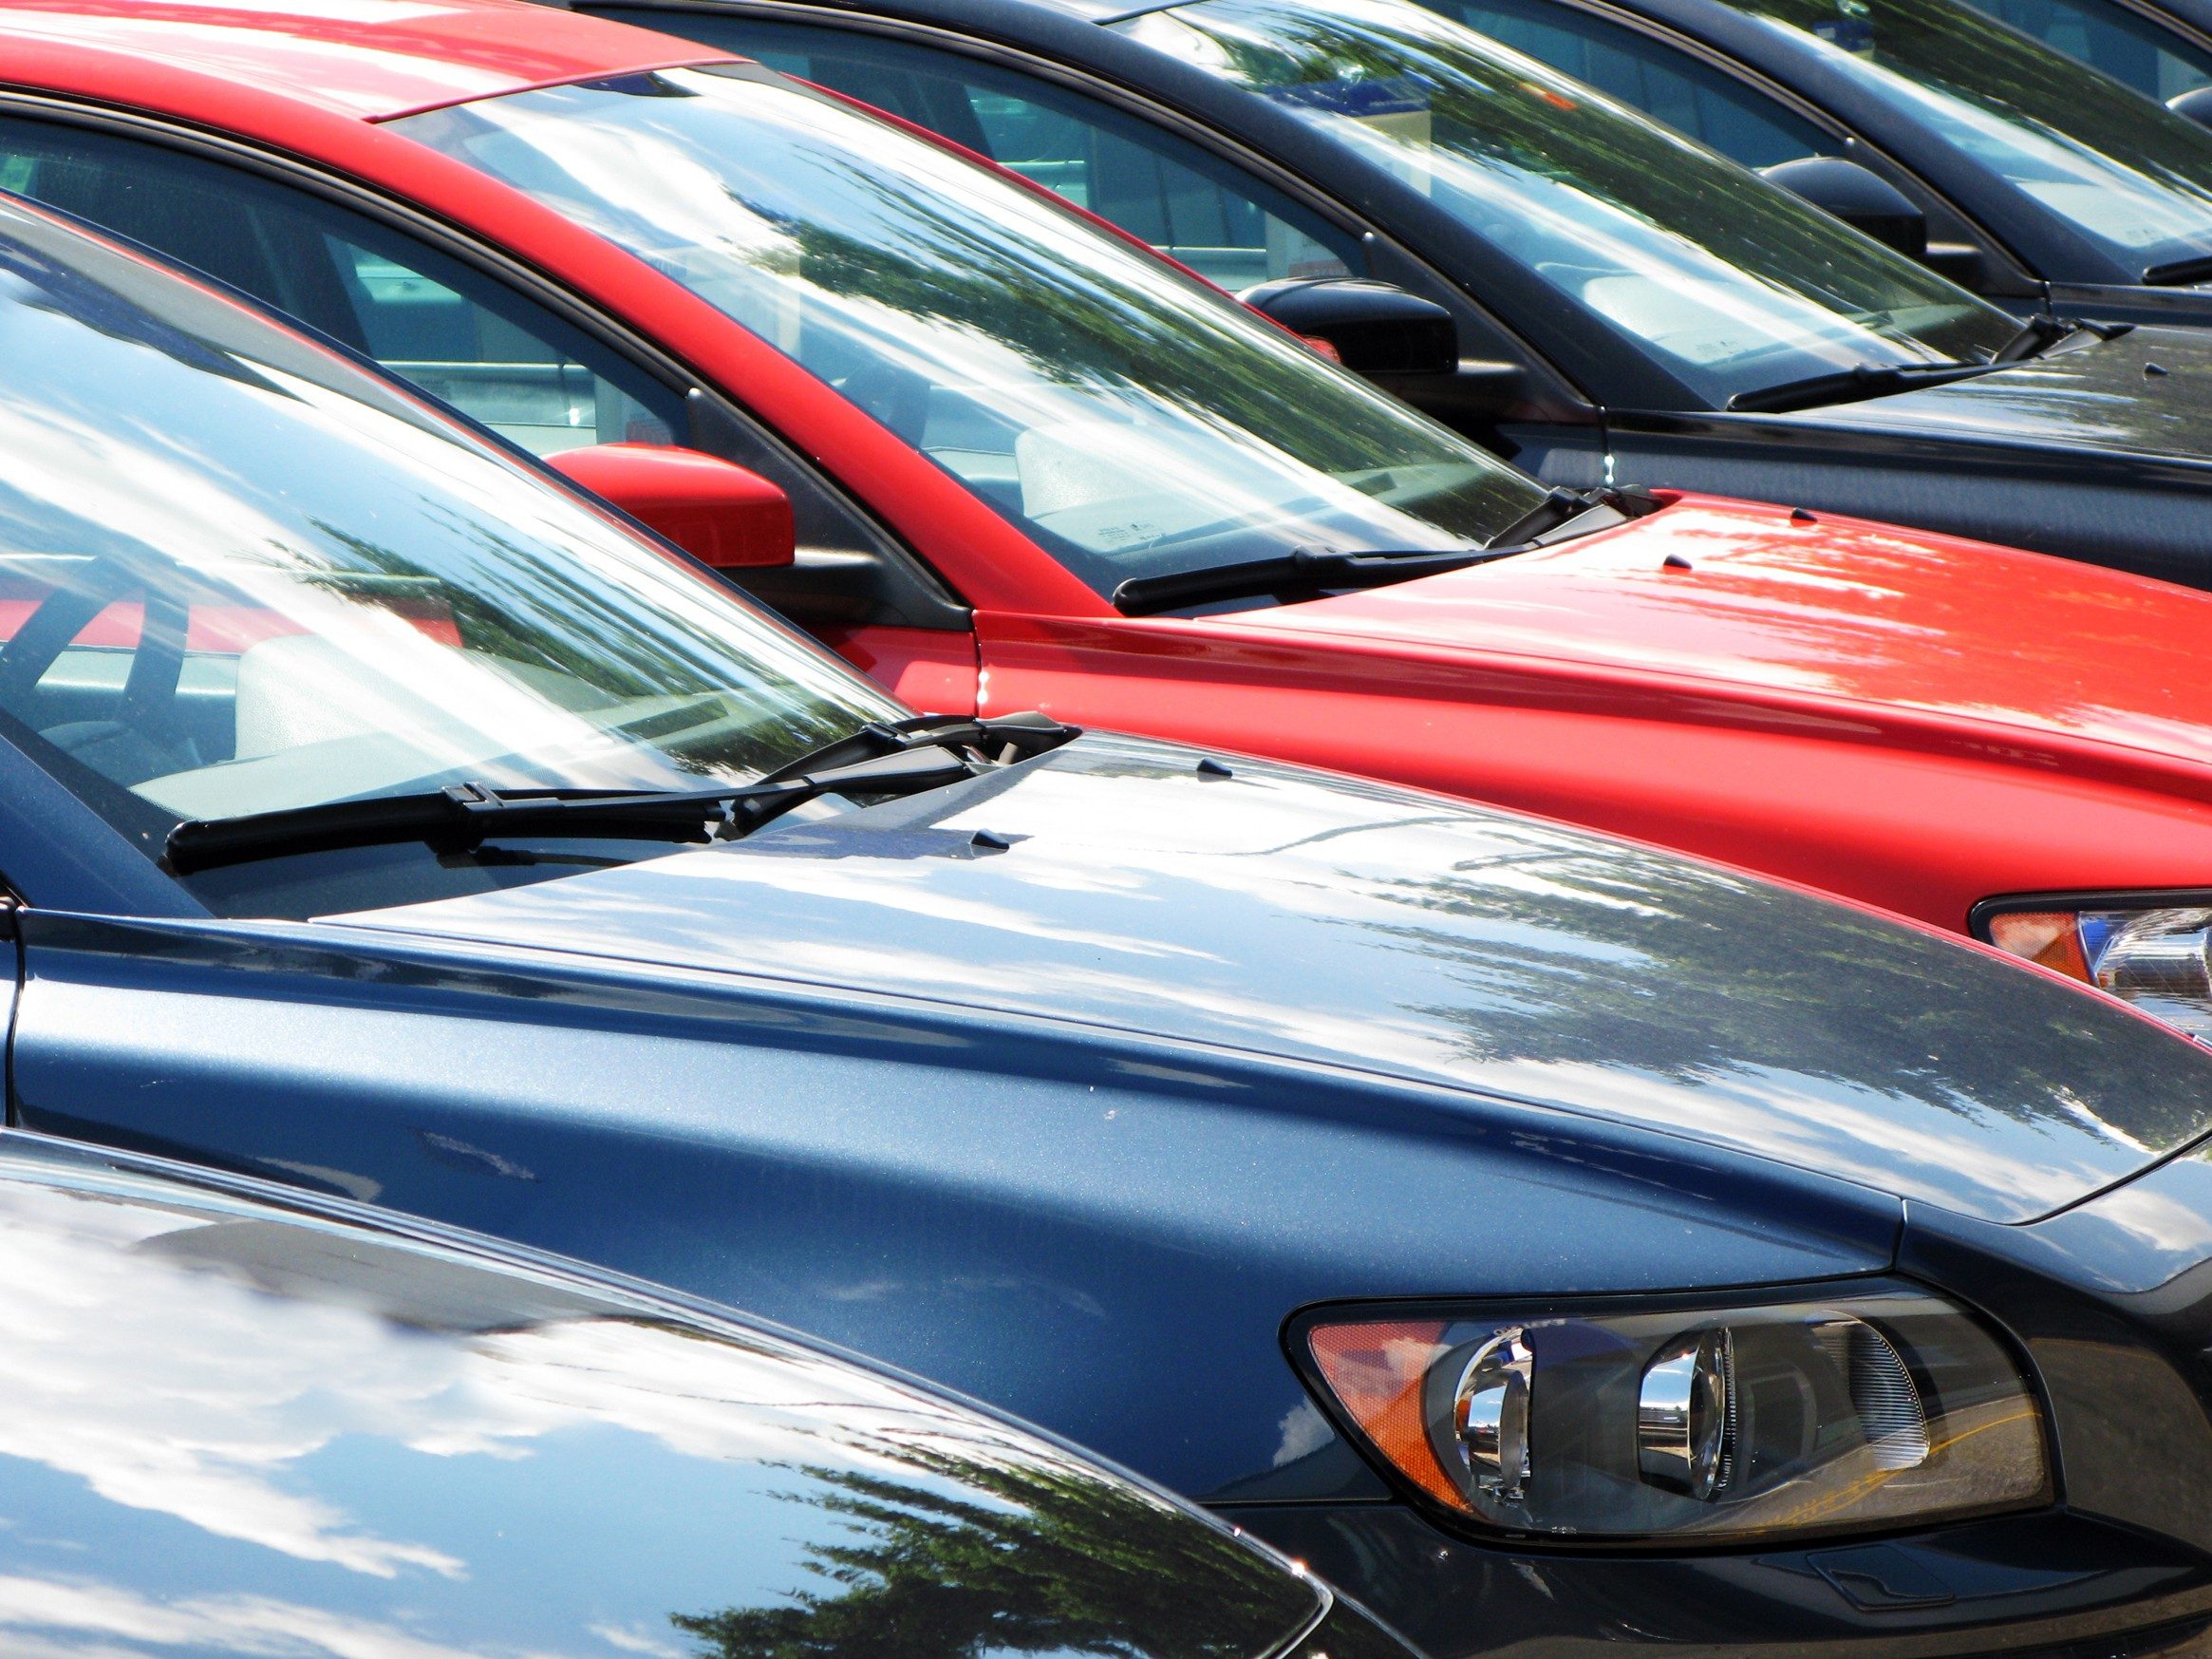 1. Get to Know Local Car Auctions